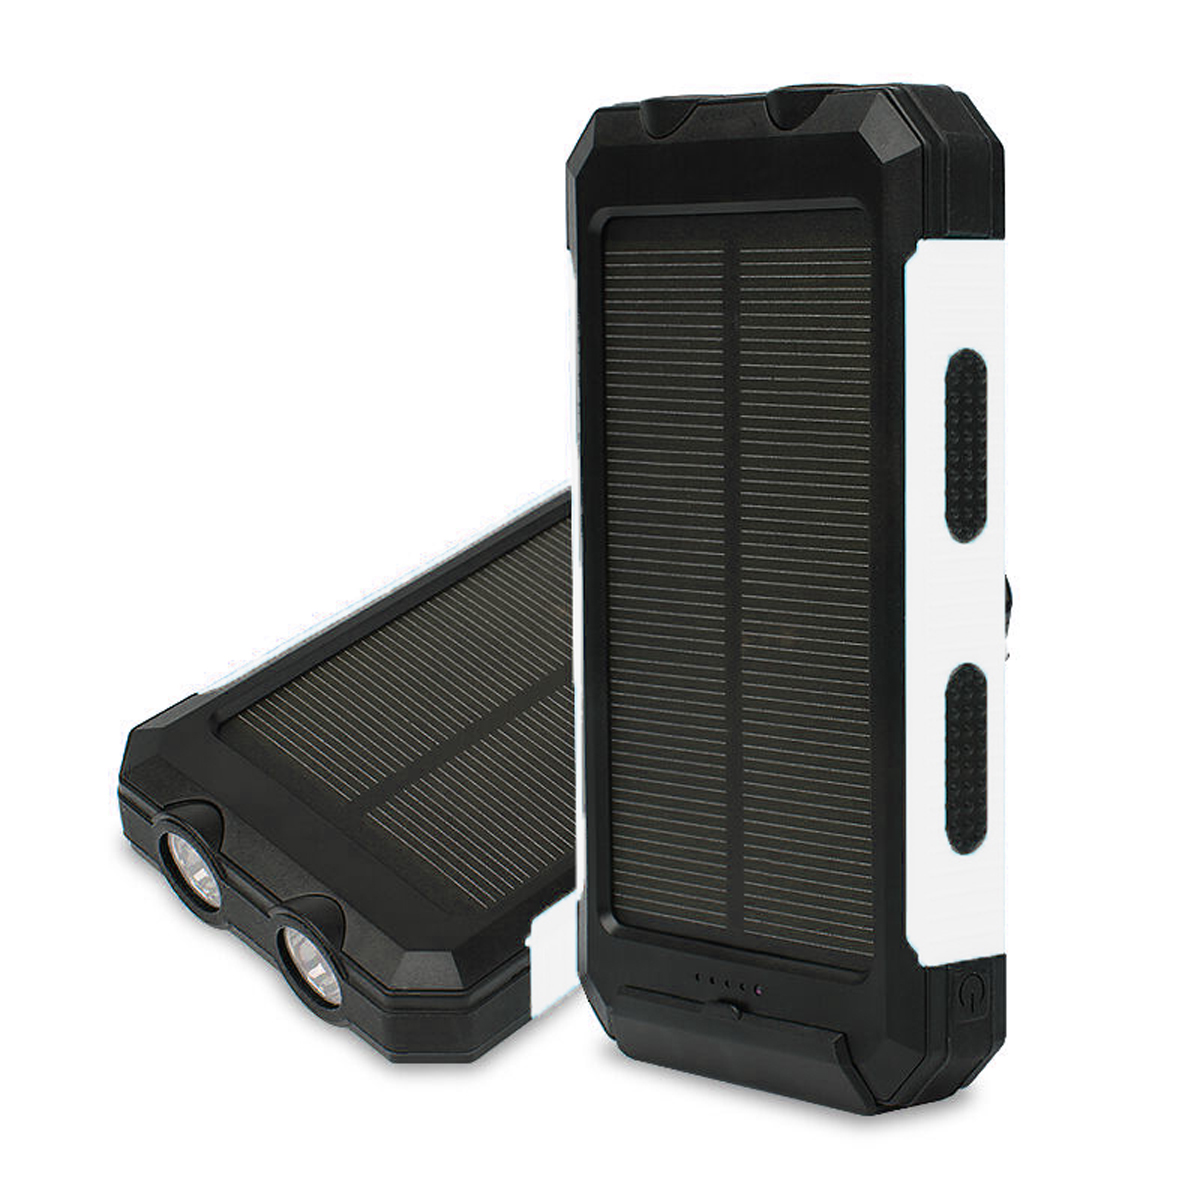 8000MAH Waterproof Solar Power Bank Solar Charger Built In Compass Dual USB Portable 2 LEDs Light